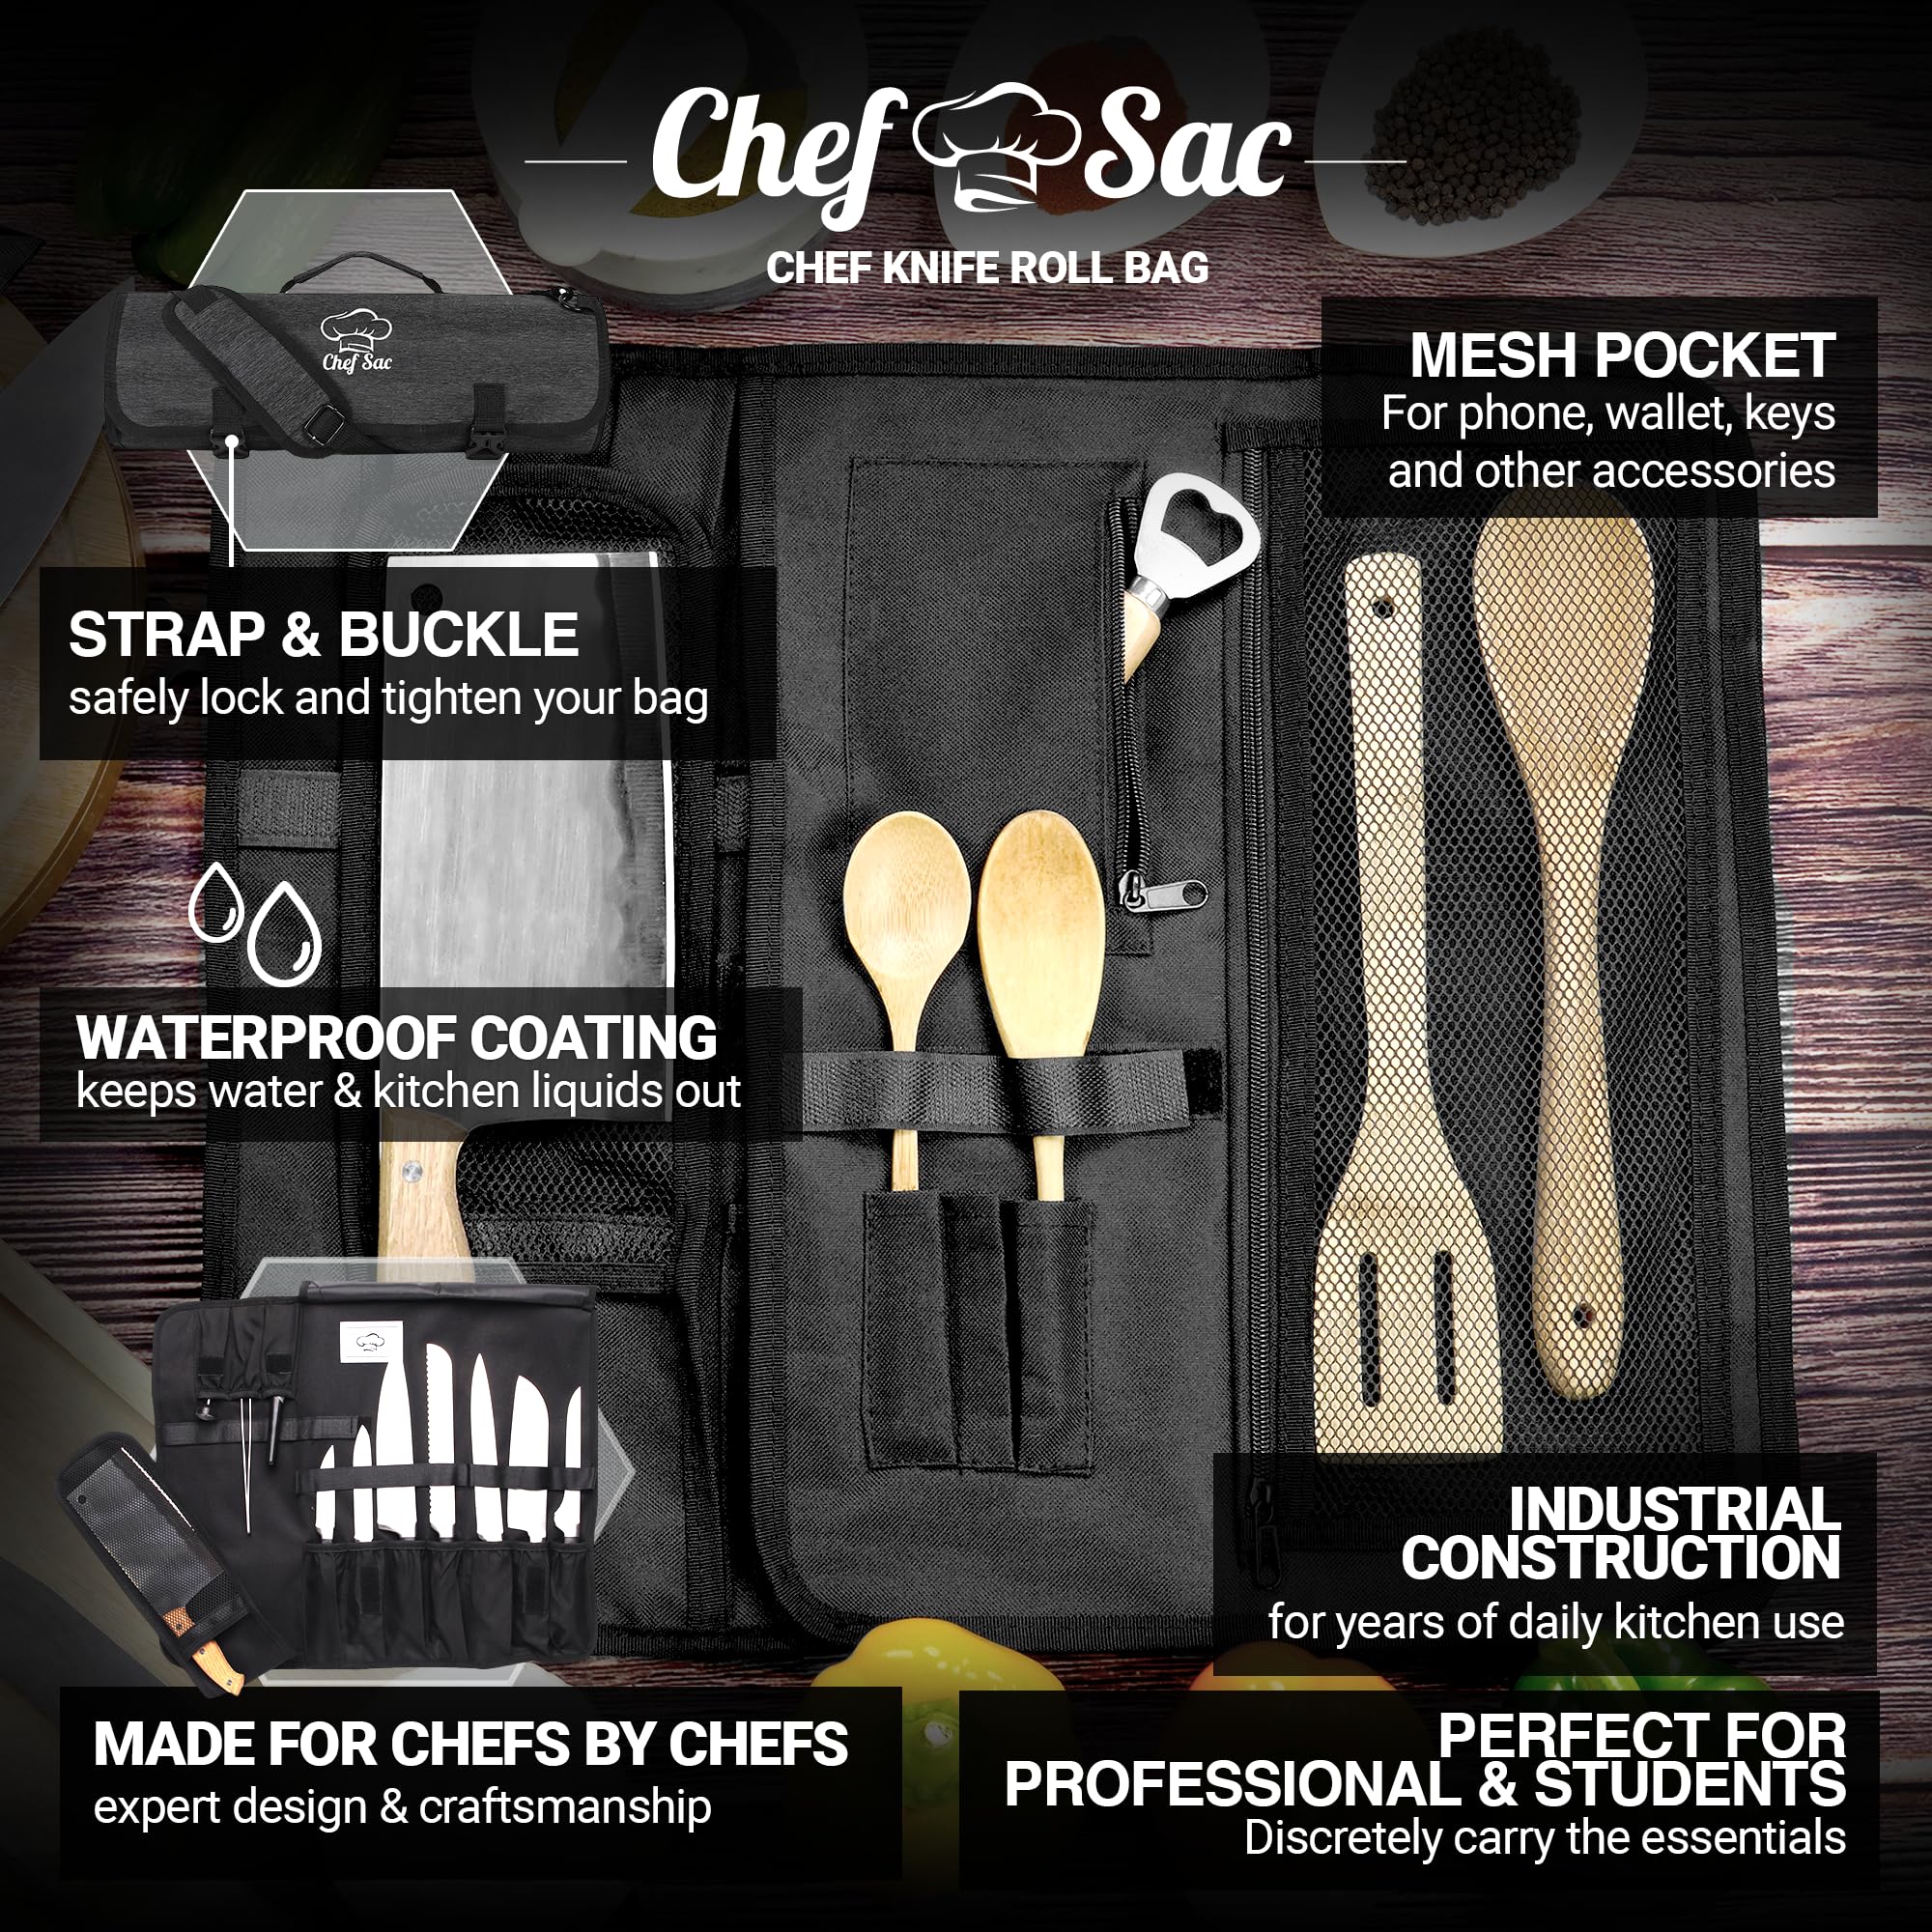 Chef Knife Roll Bag | 8+ Slots for Knives & Kitchen Tools | Water Resistant Knife Bag | Knife Carrying Case Only, Tools Not Included | Chef Knife Bag for Professional Chefs & Culinary Students (Blue)